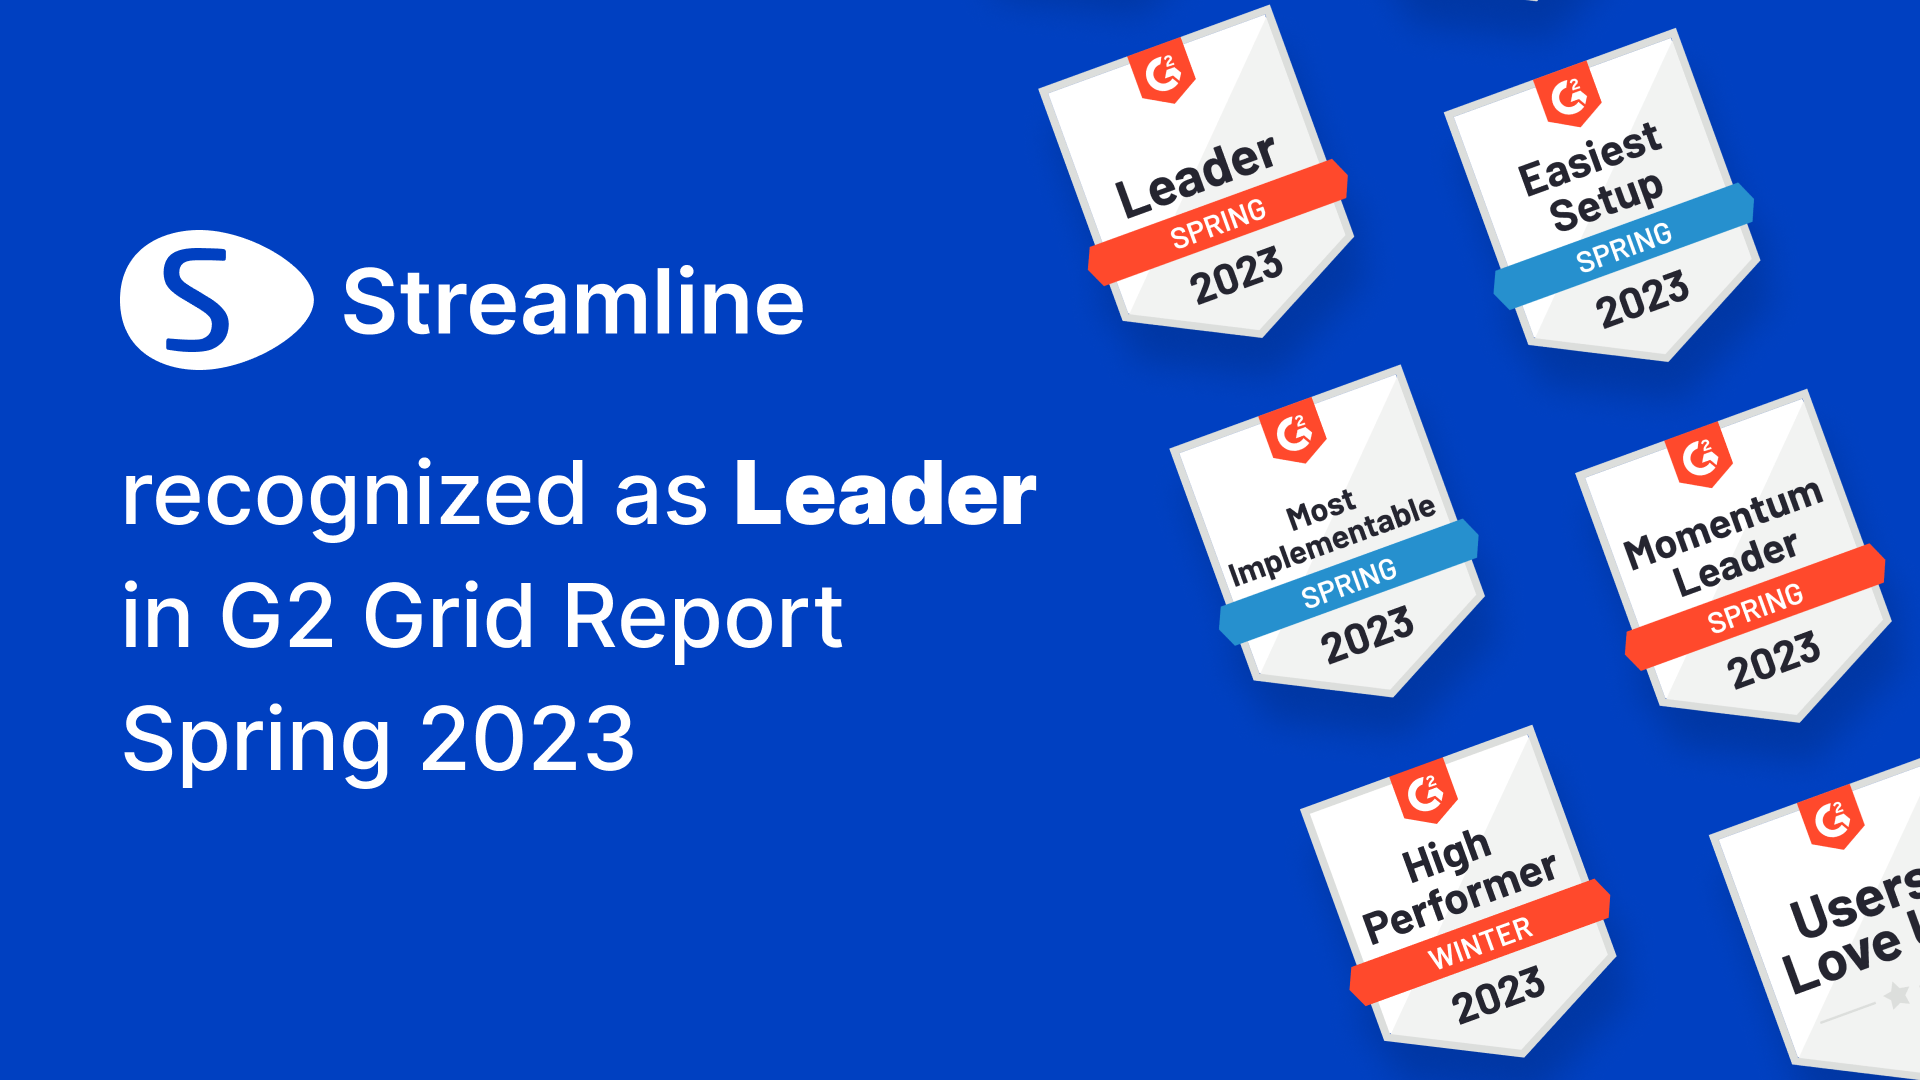 Streamline is a Leader in Supply Chain categories on G2